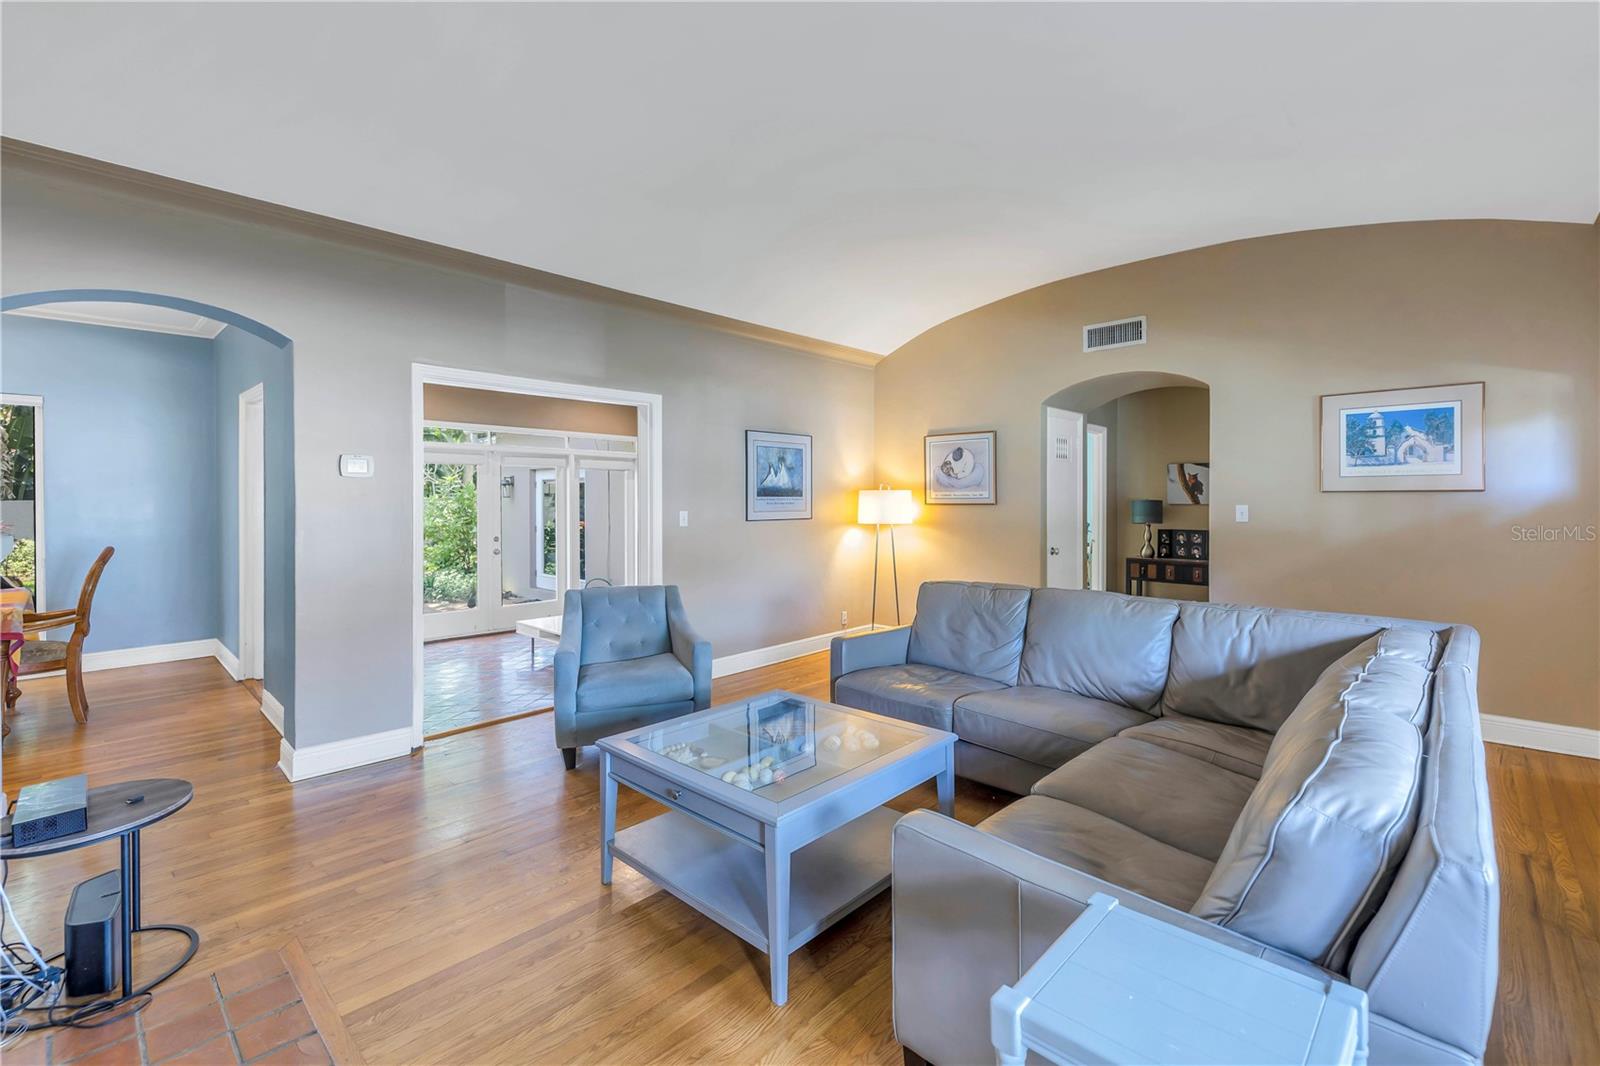 This wonderful living area offers a superb arched ceilings and superb hardwood flooring.